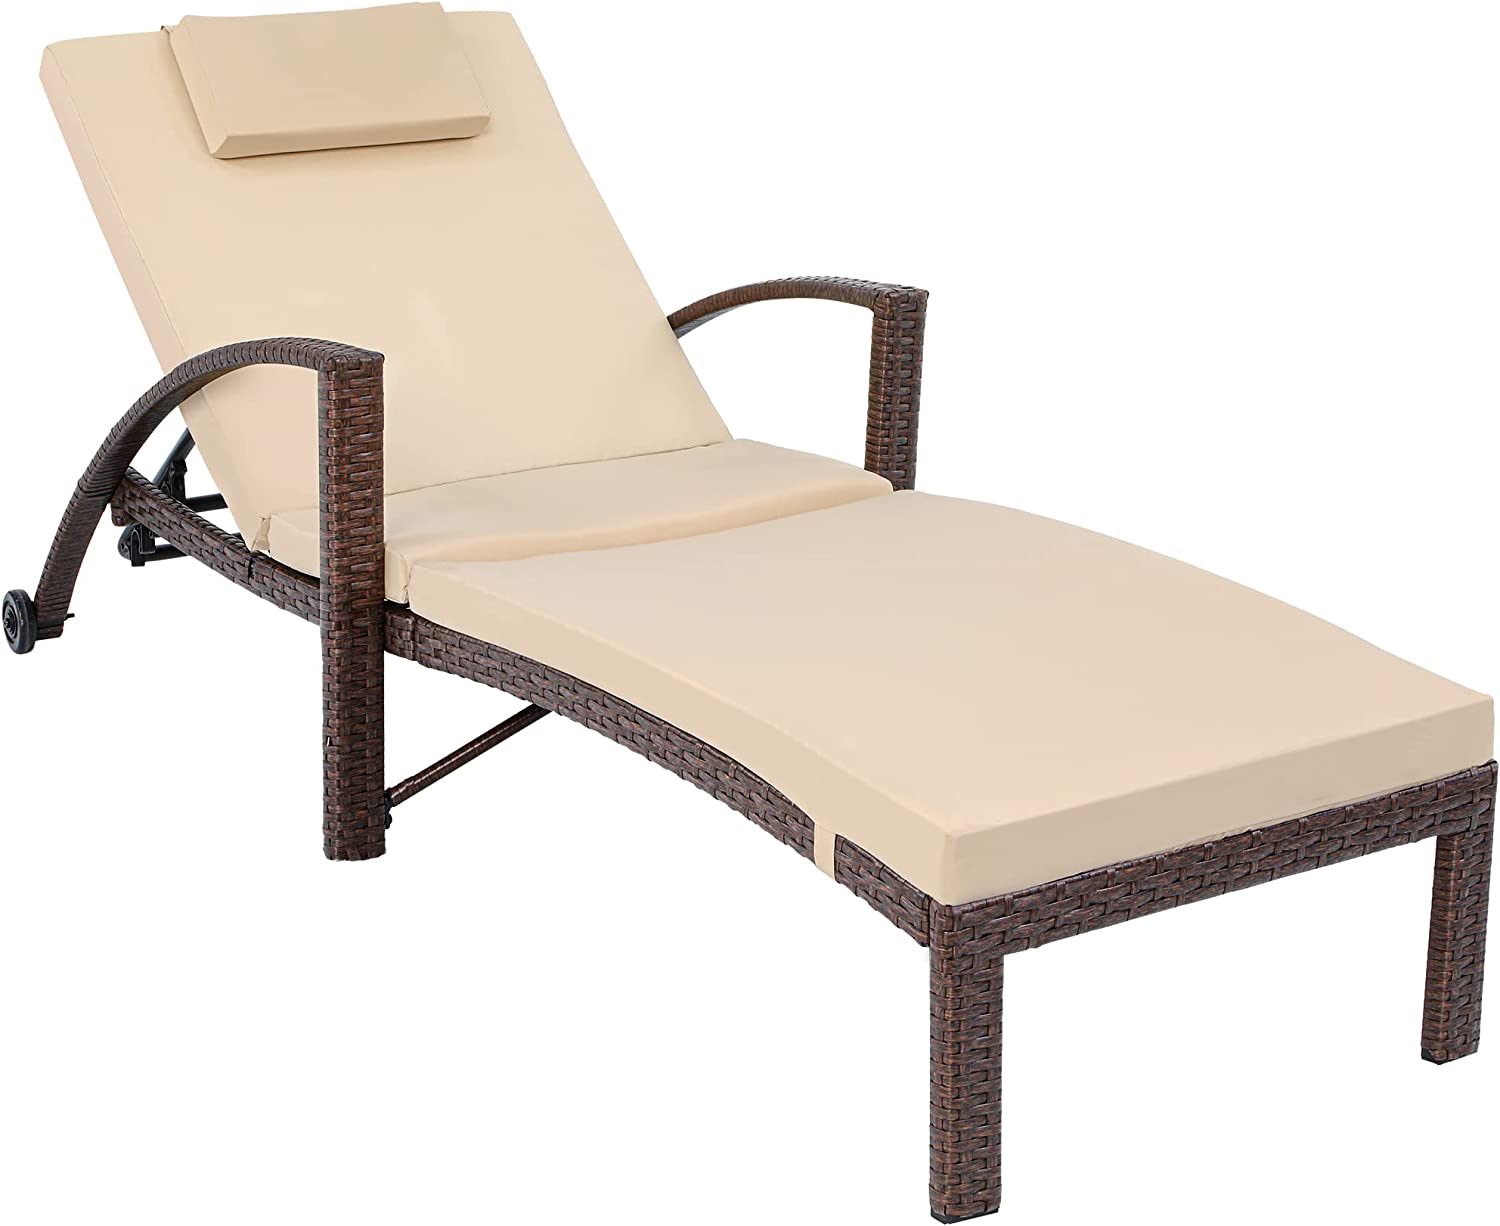 DWVO Outdoor Chaise Lounge Chairs, PE Rattan Wicker Patio Pool Loungers with Adjustable Backrest, Arm, Cushion, Pillow and Wheels for Poolside Backyard Porch Garden Beach (1, Brown) - image 2 of 9